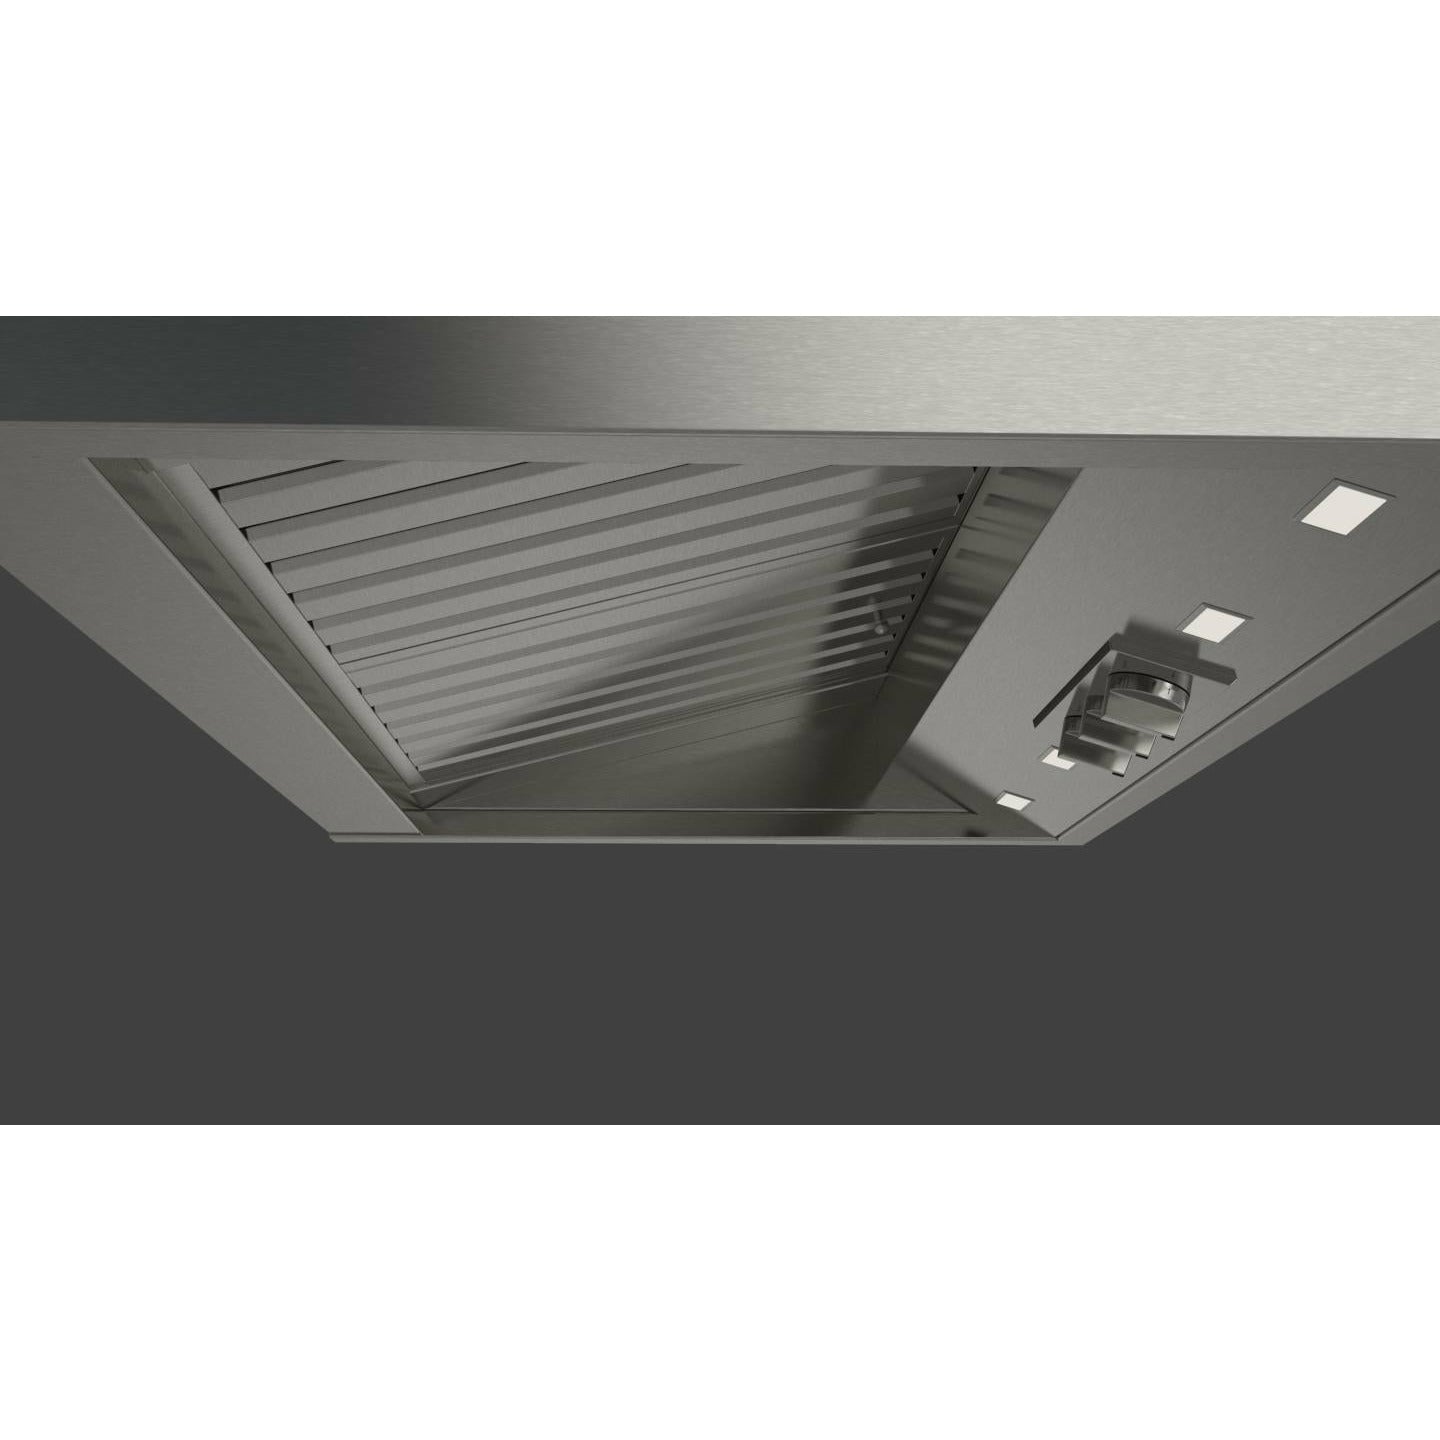 Fulgor Milano 36" Professional Hood - 1000 CFM, Stainless Steel - F6PH36DS1 Hoods F6PH36DS1 Luxury Appliances Direct